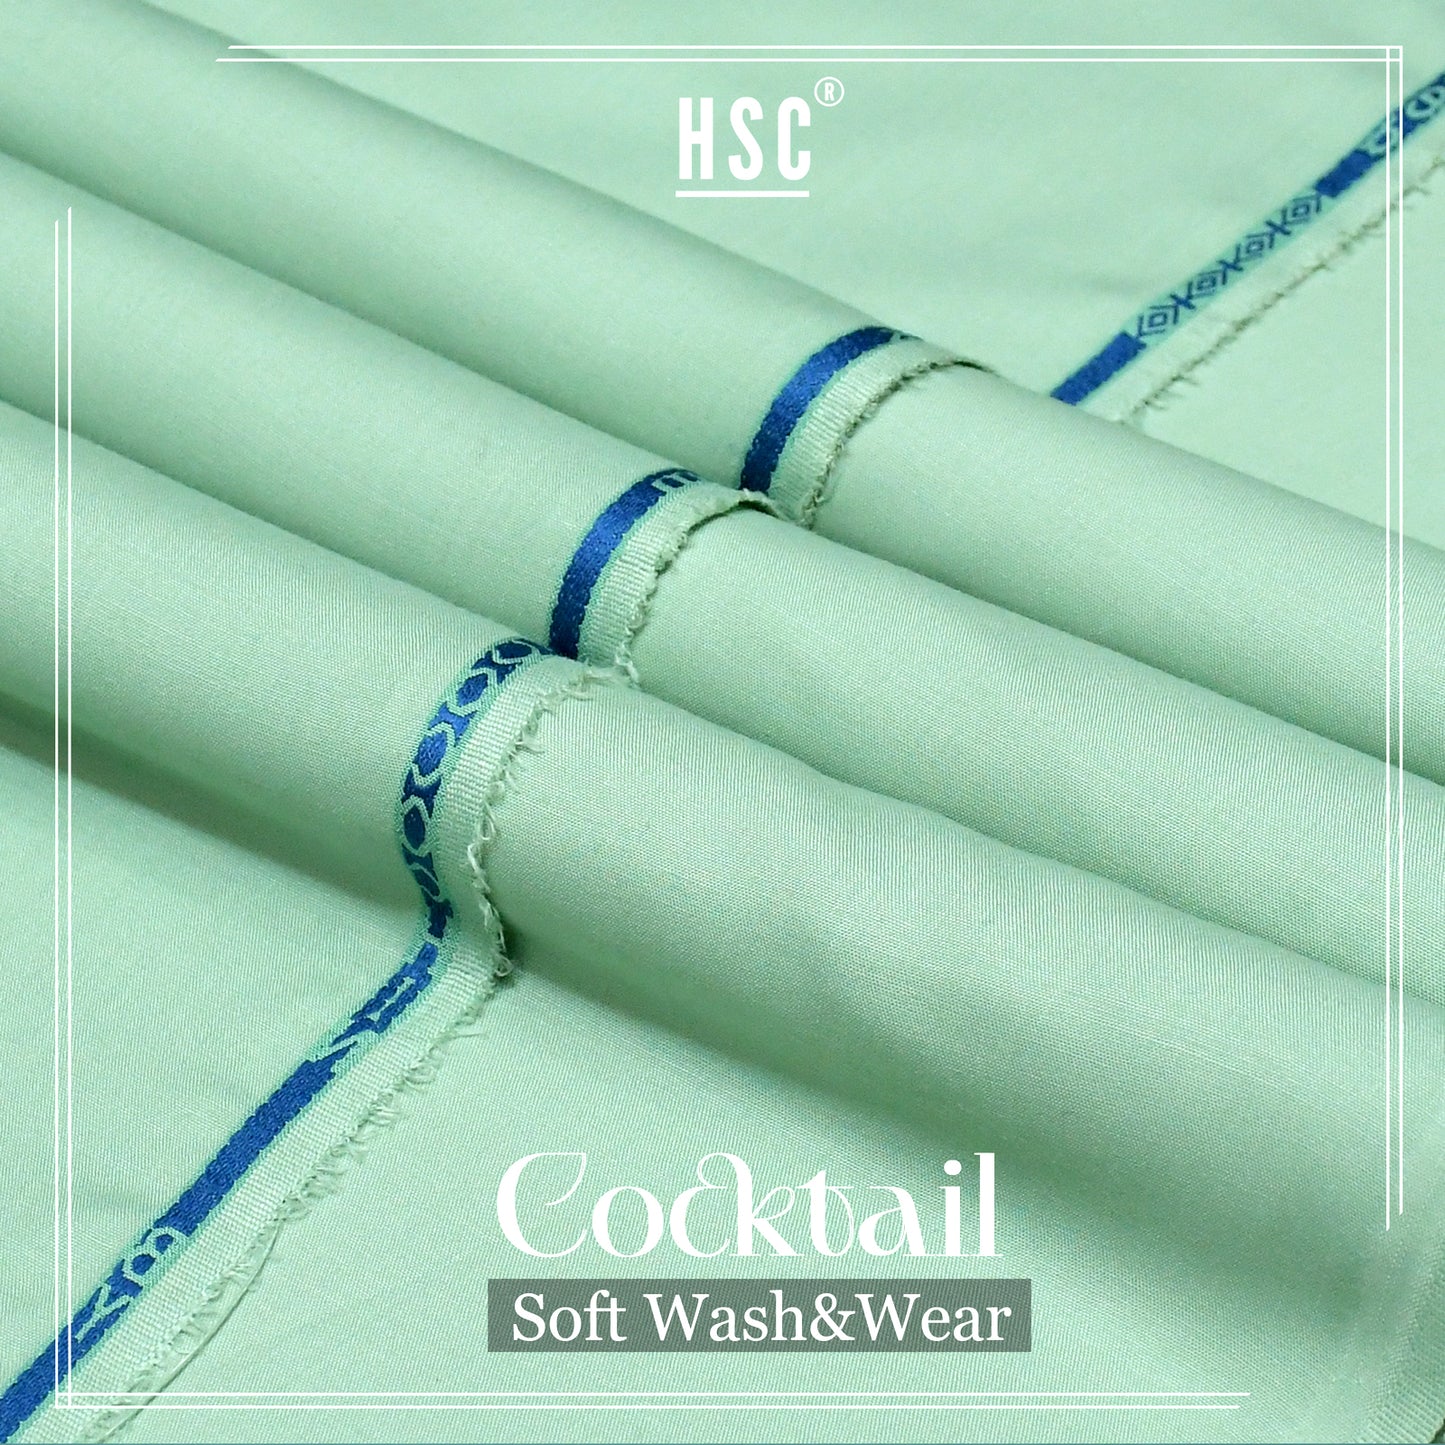 Buy 1 Get 1 Free Cocktail Soft Wash&Wear - CSW13 HSC BLENDED